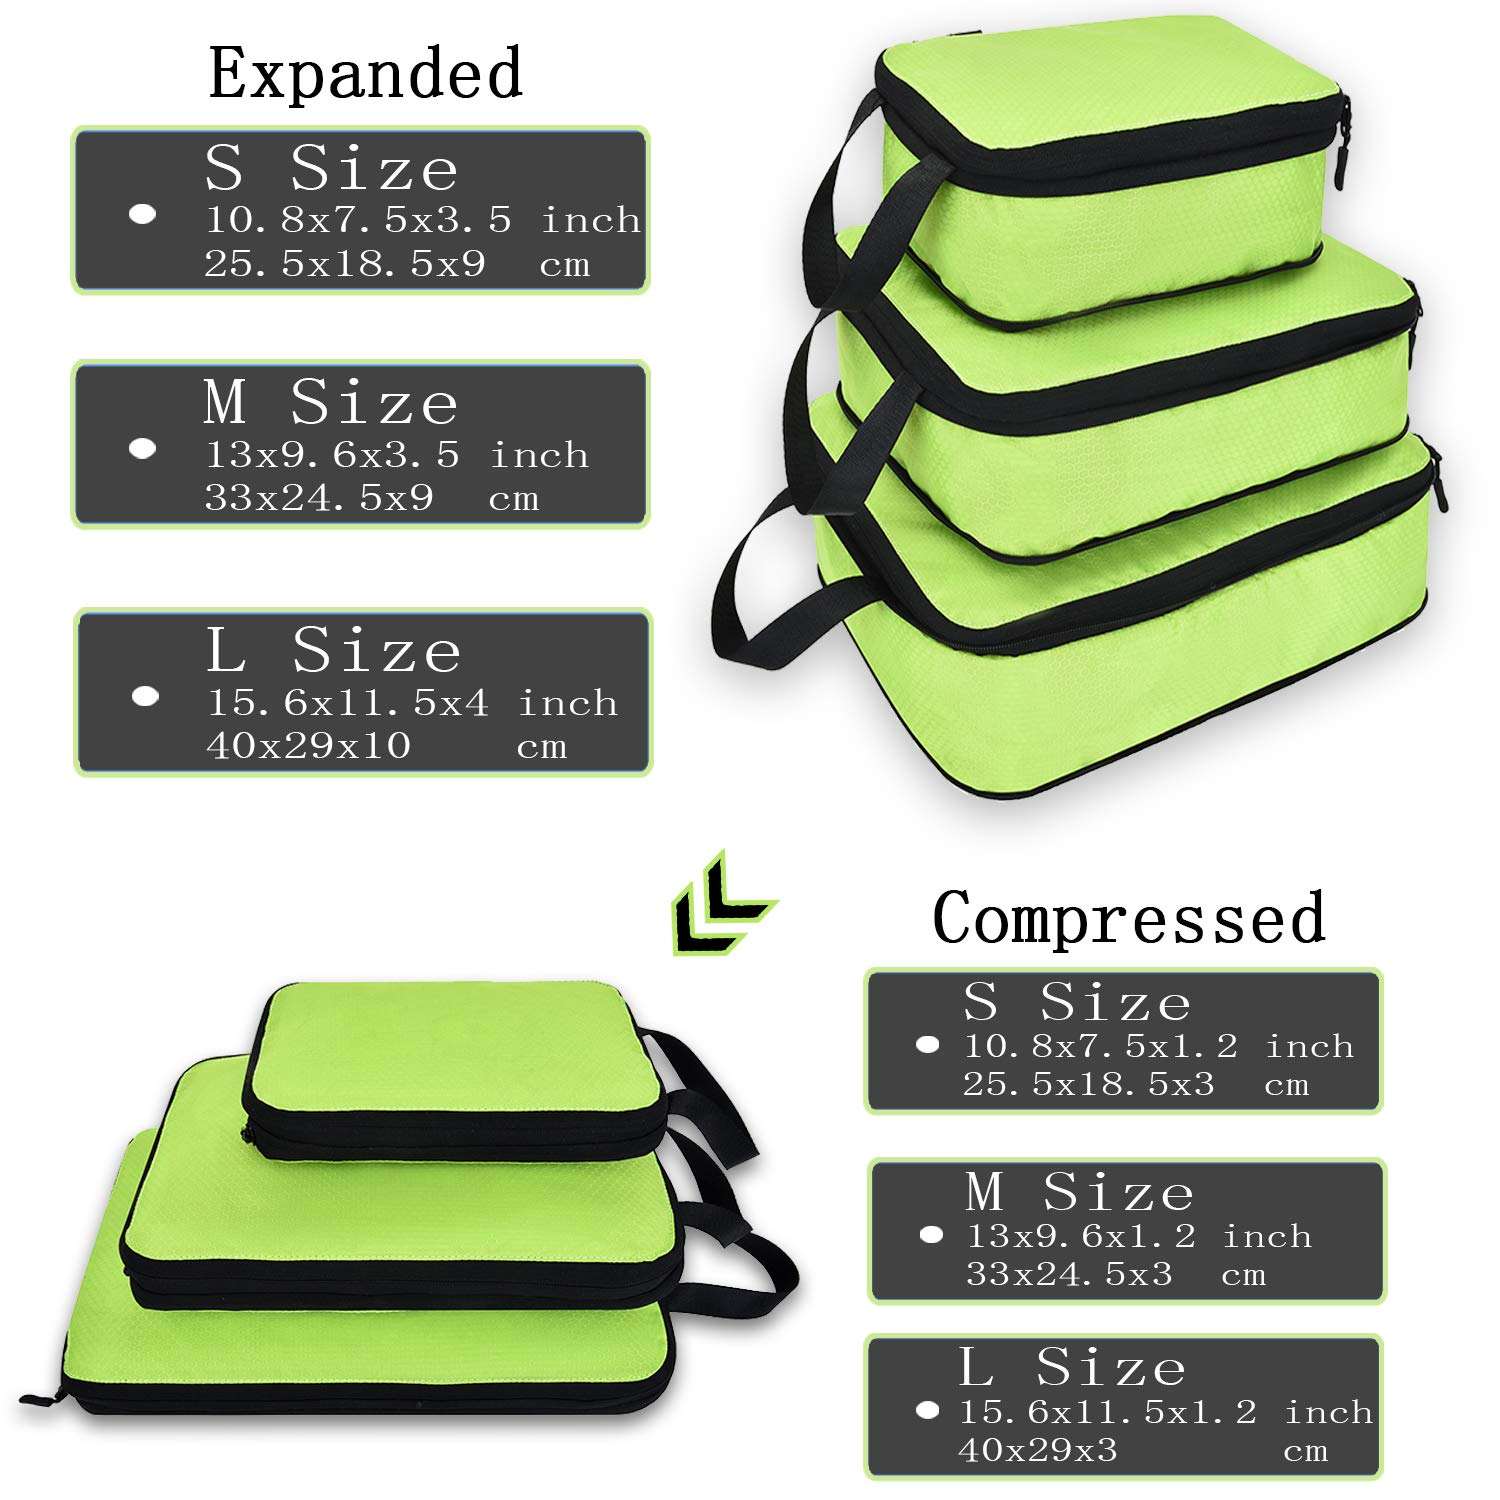 Luggage Packing Organizers Product Details